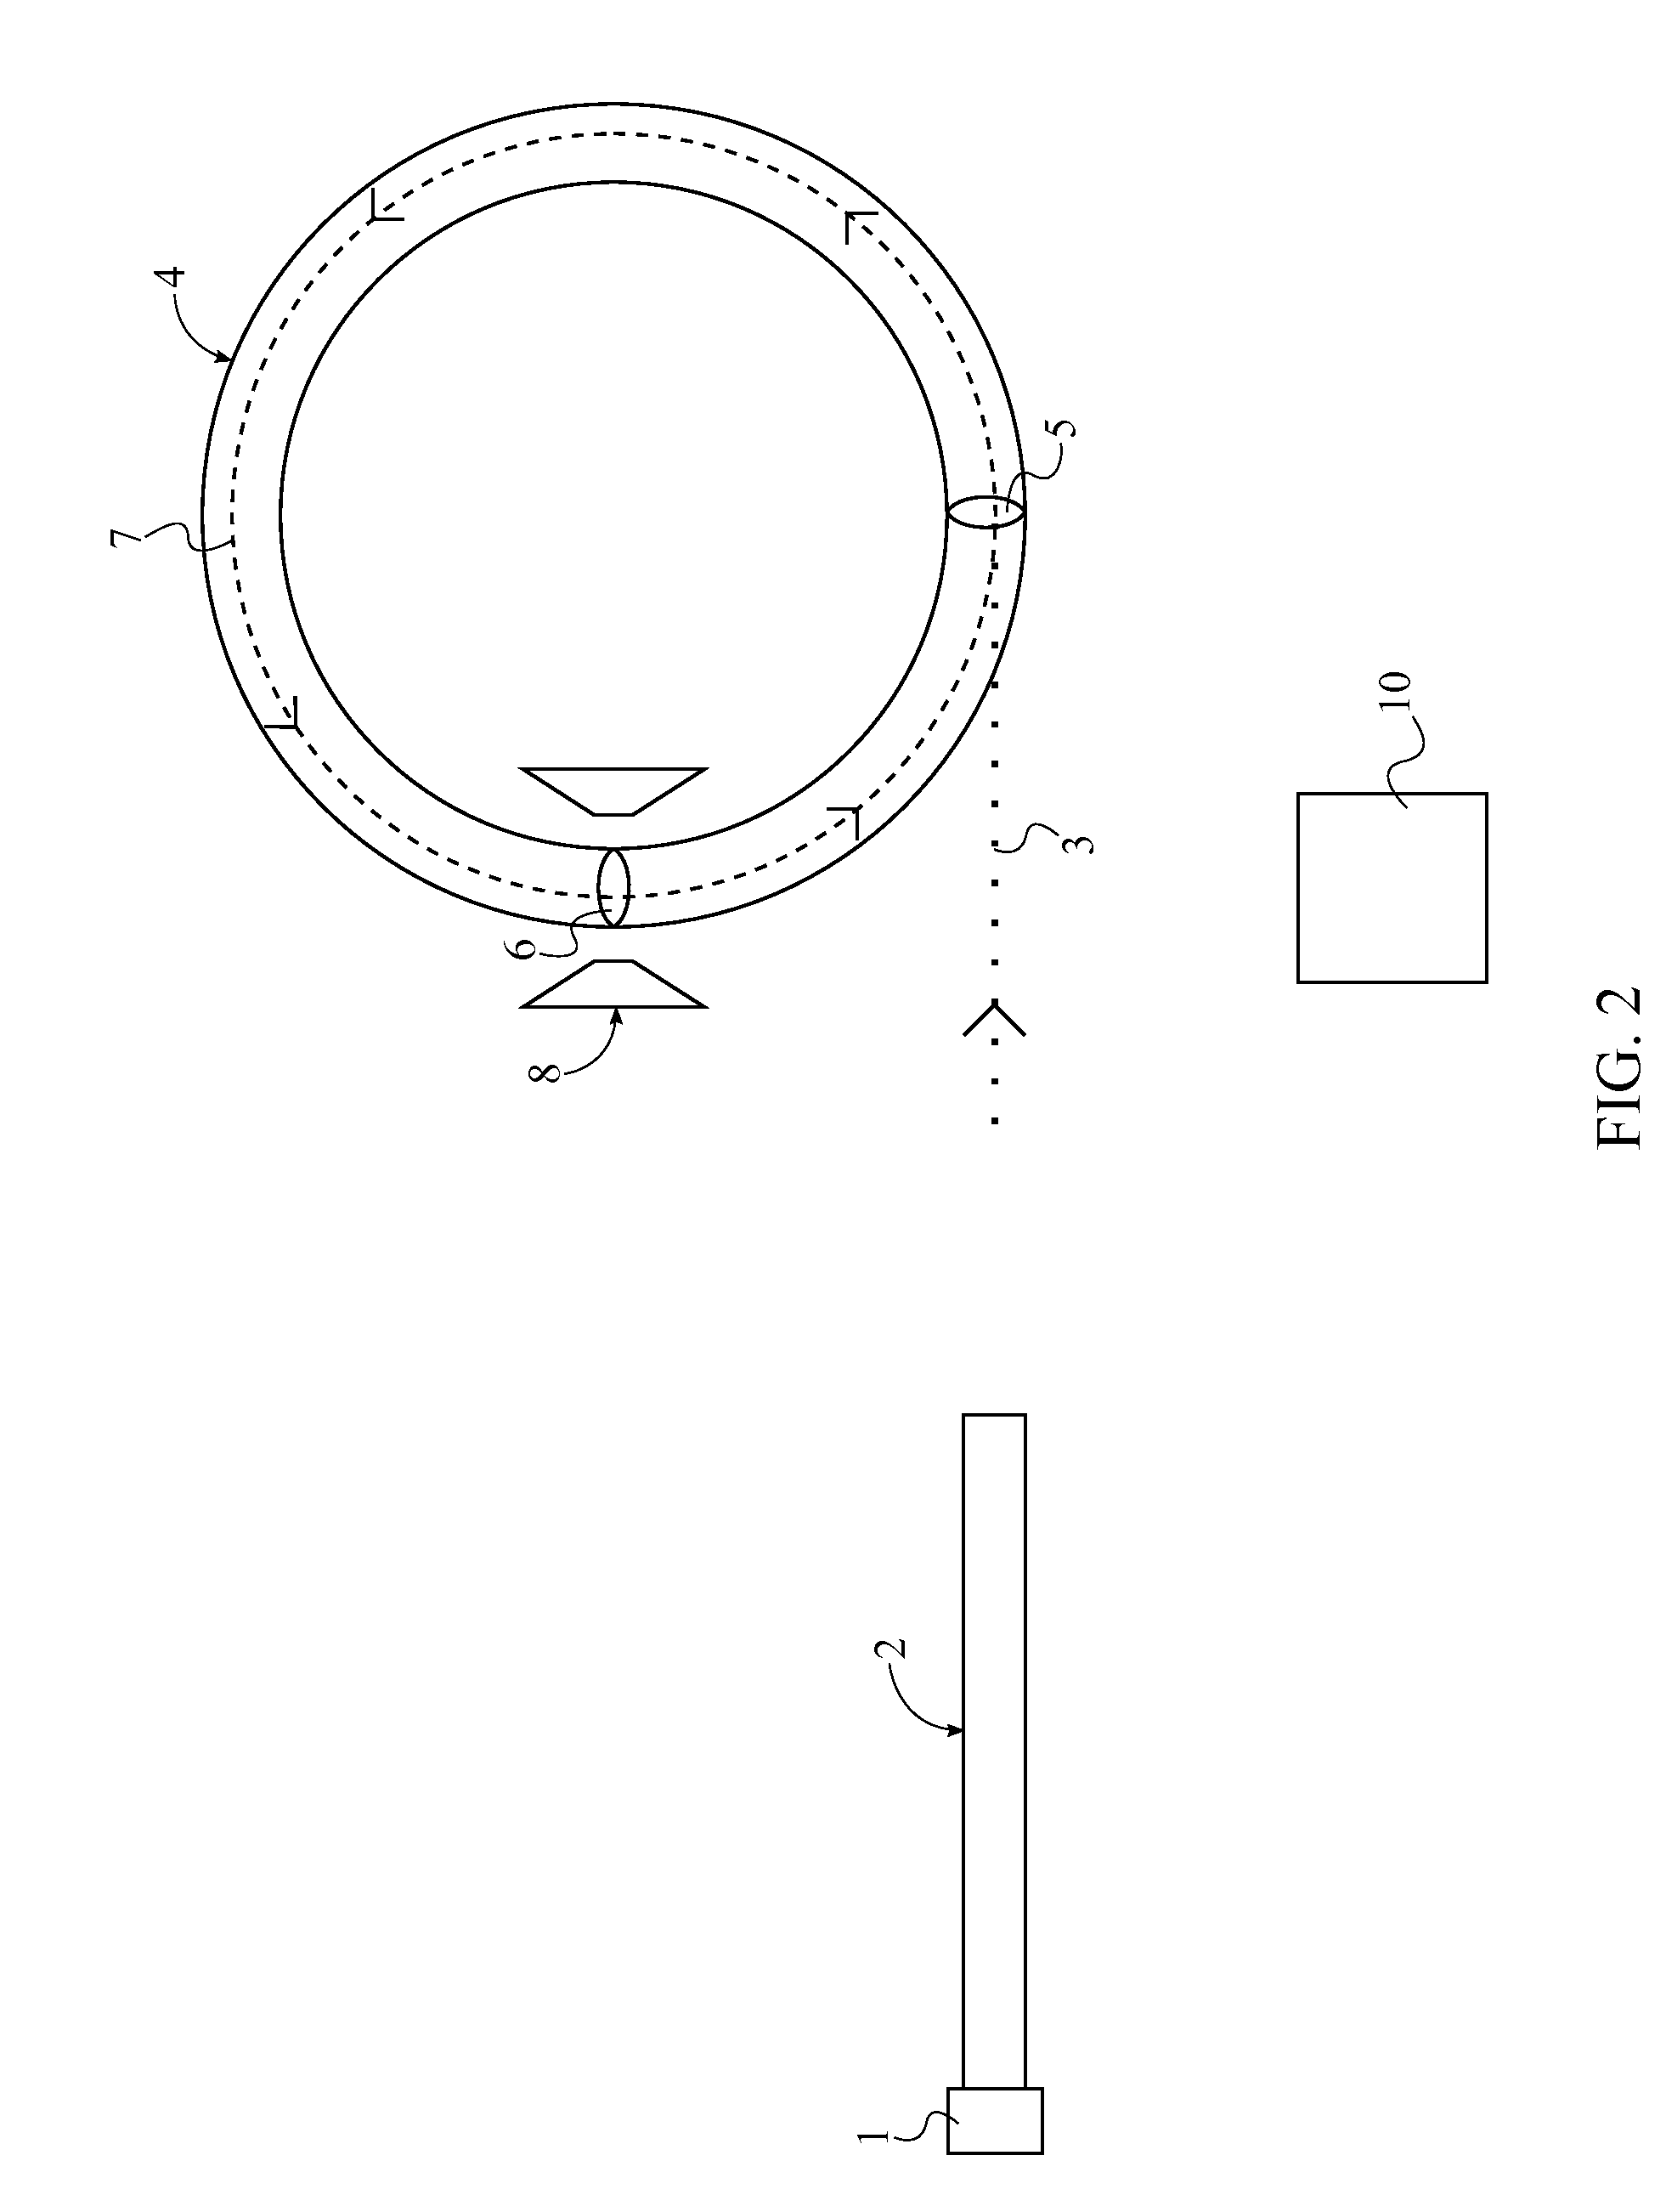 System and Method for Delivering an Ultra-High Dose of Radiation Therapy